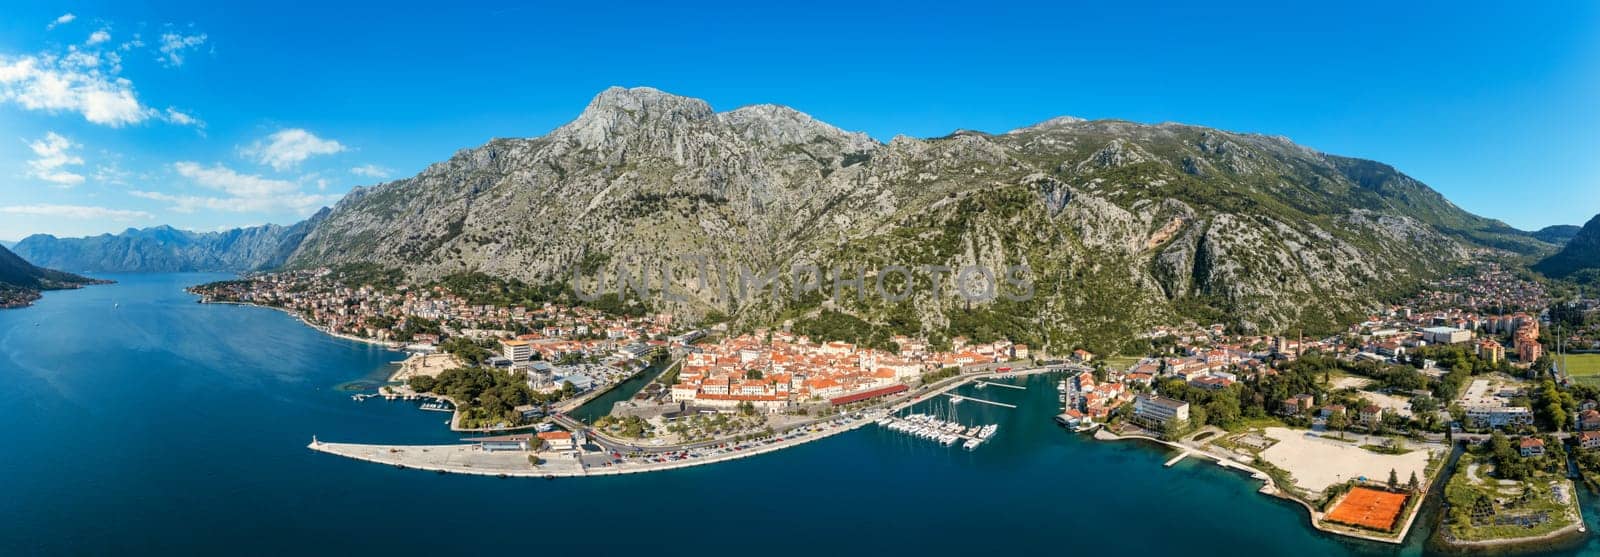 Aerial view of the old town of Kotor, Montenegro. Bay of Kotor bay is one of the most beautiful places on Adriatic Sea. Historical Kotor Old town and the Kotor bay of Adriatic sea, Montenegro. by DaLiu